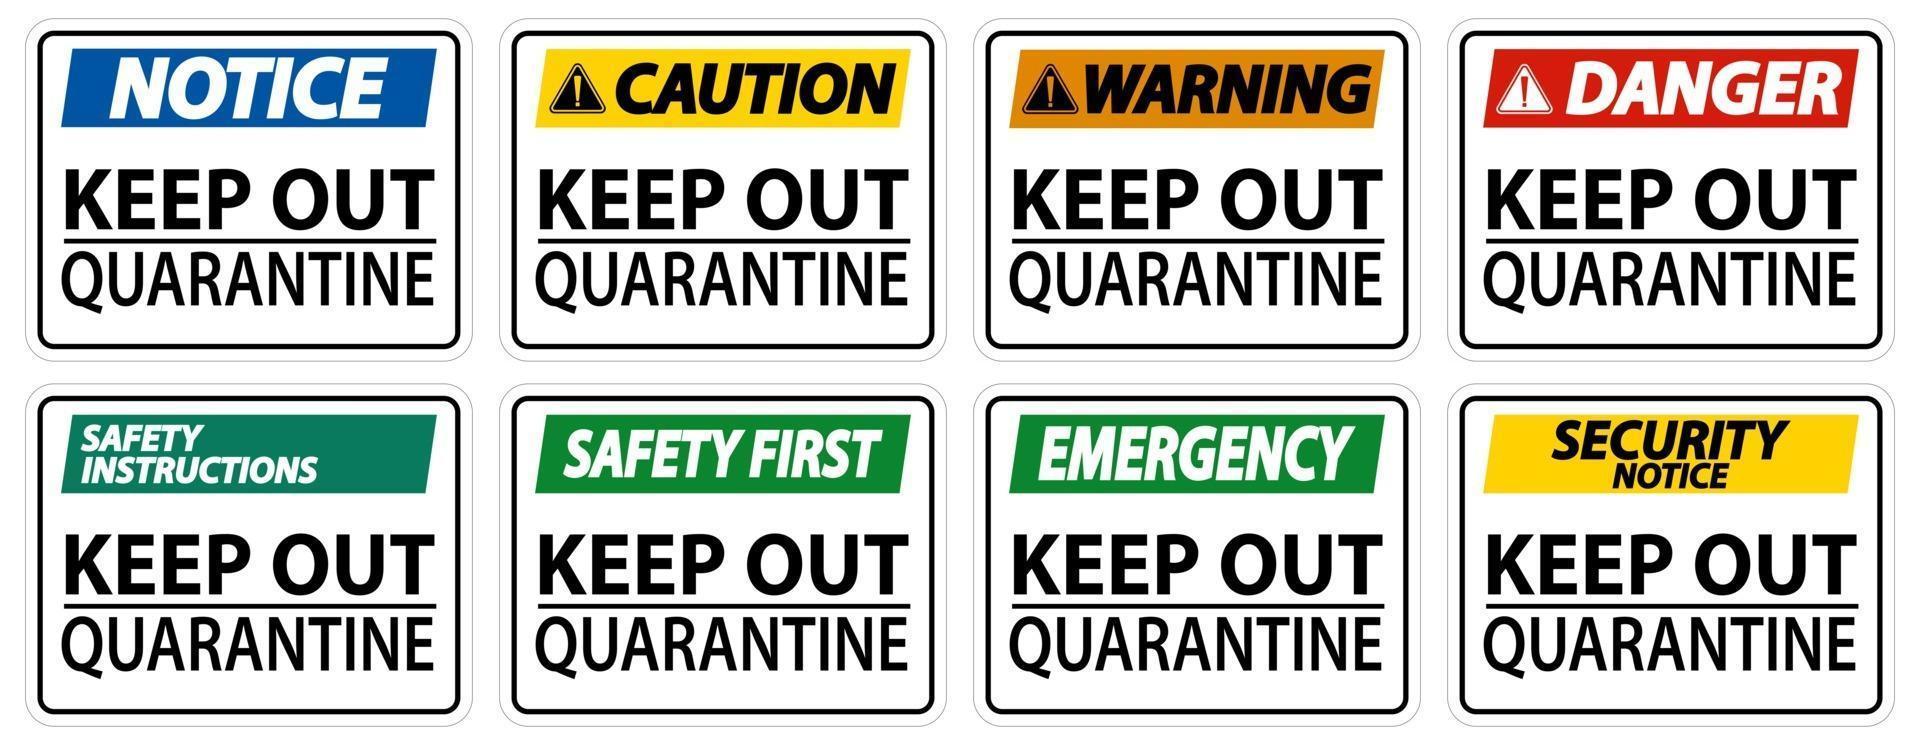 Keep Out Quarantine Sign Isolate On White Background,Vector Illustration EPS.10 vector